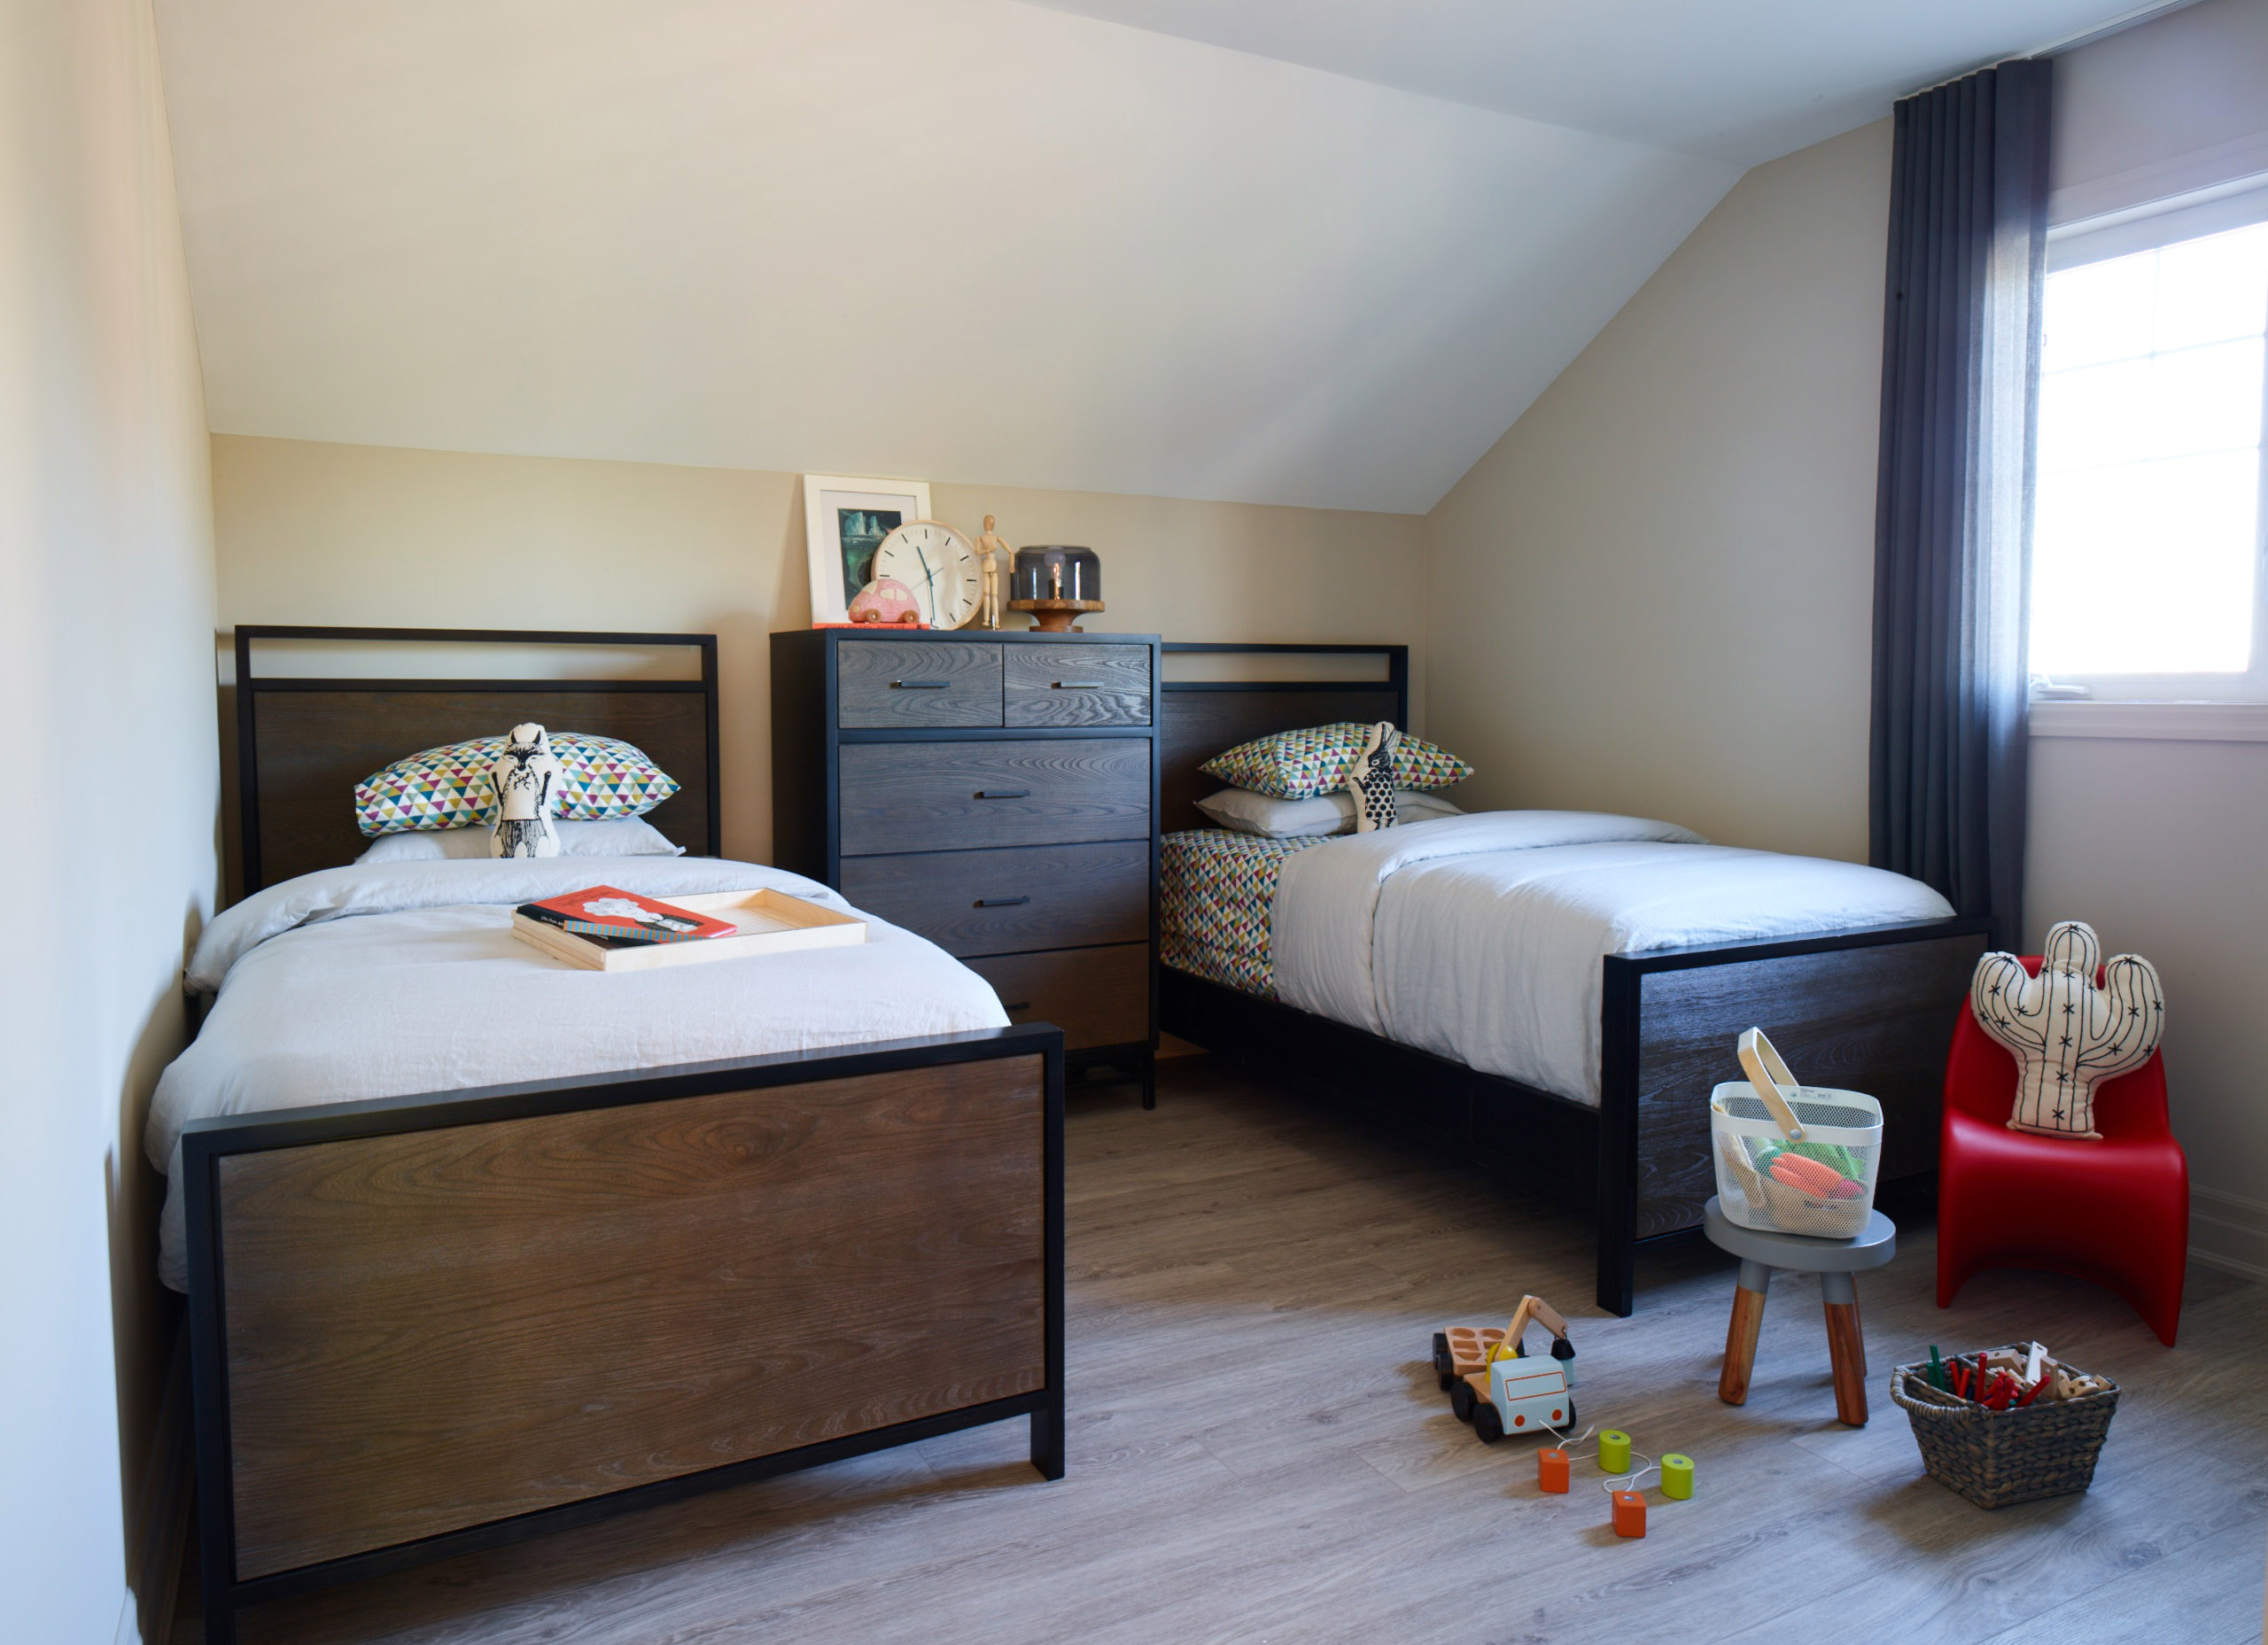 Oak Bay children's bedroom with two single beds with dresser in between, and pitched ceiling